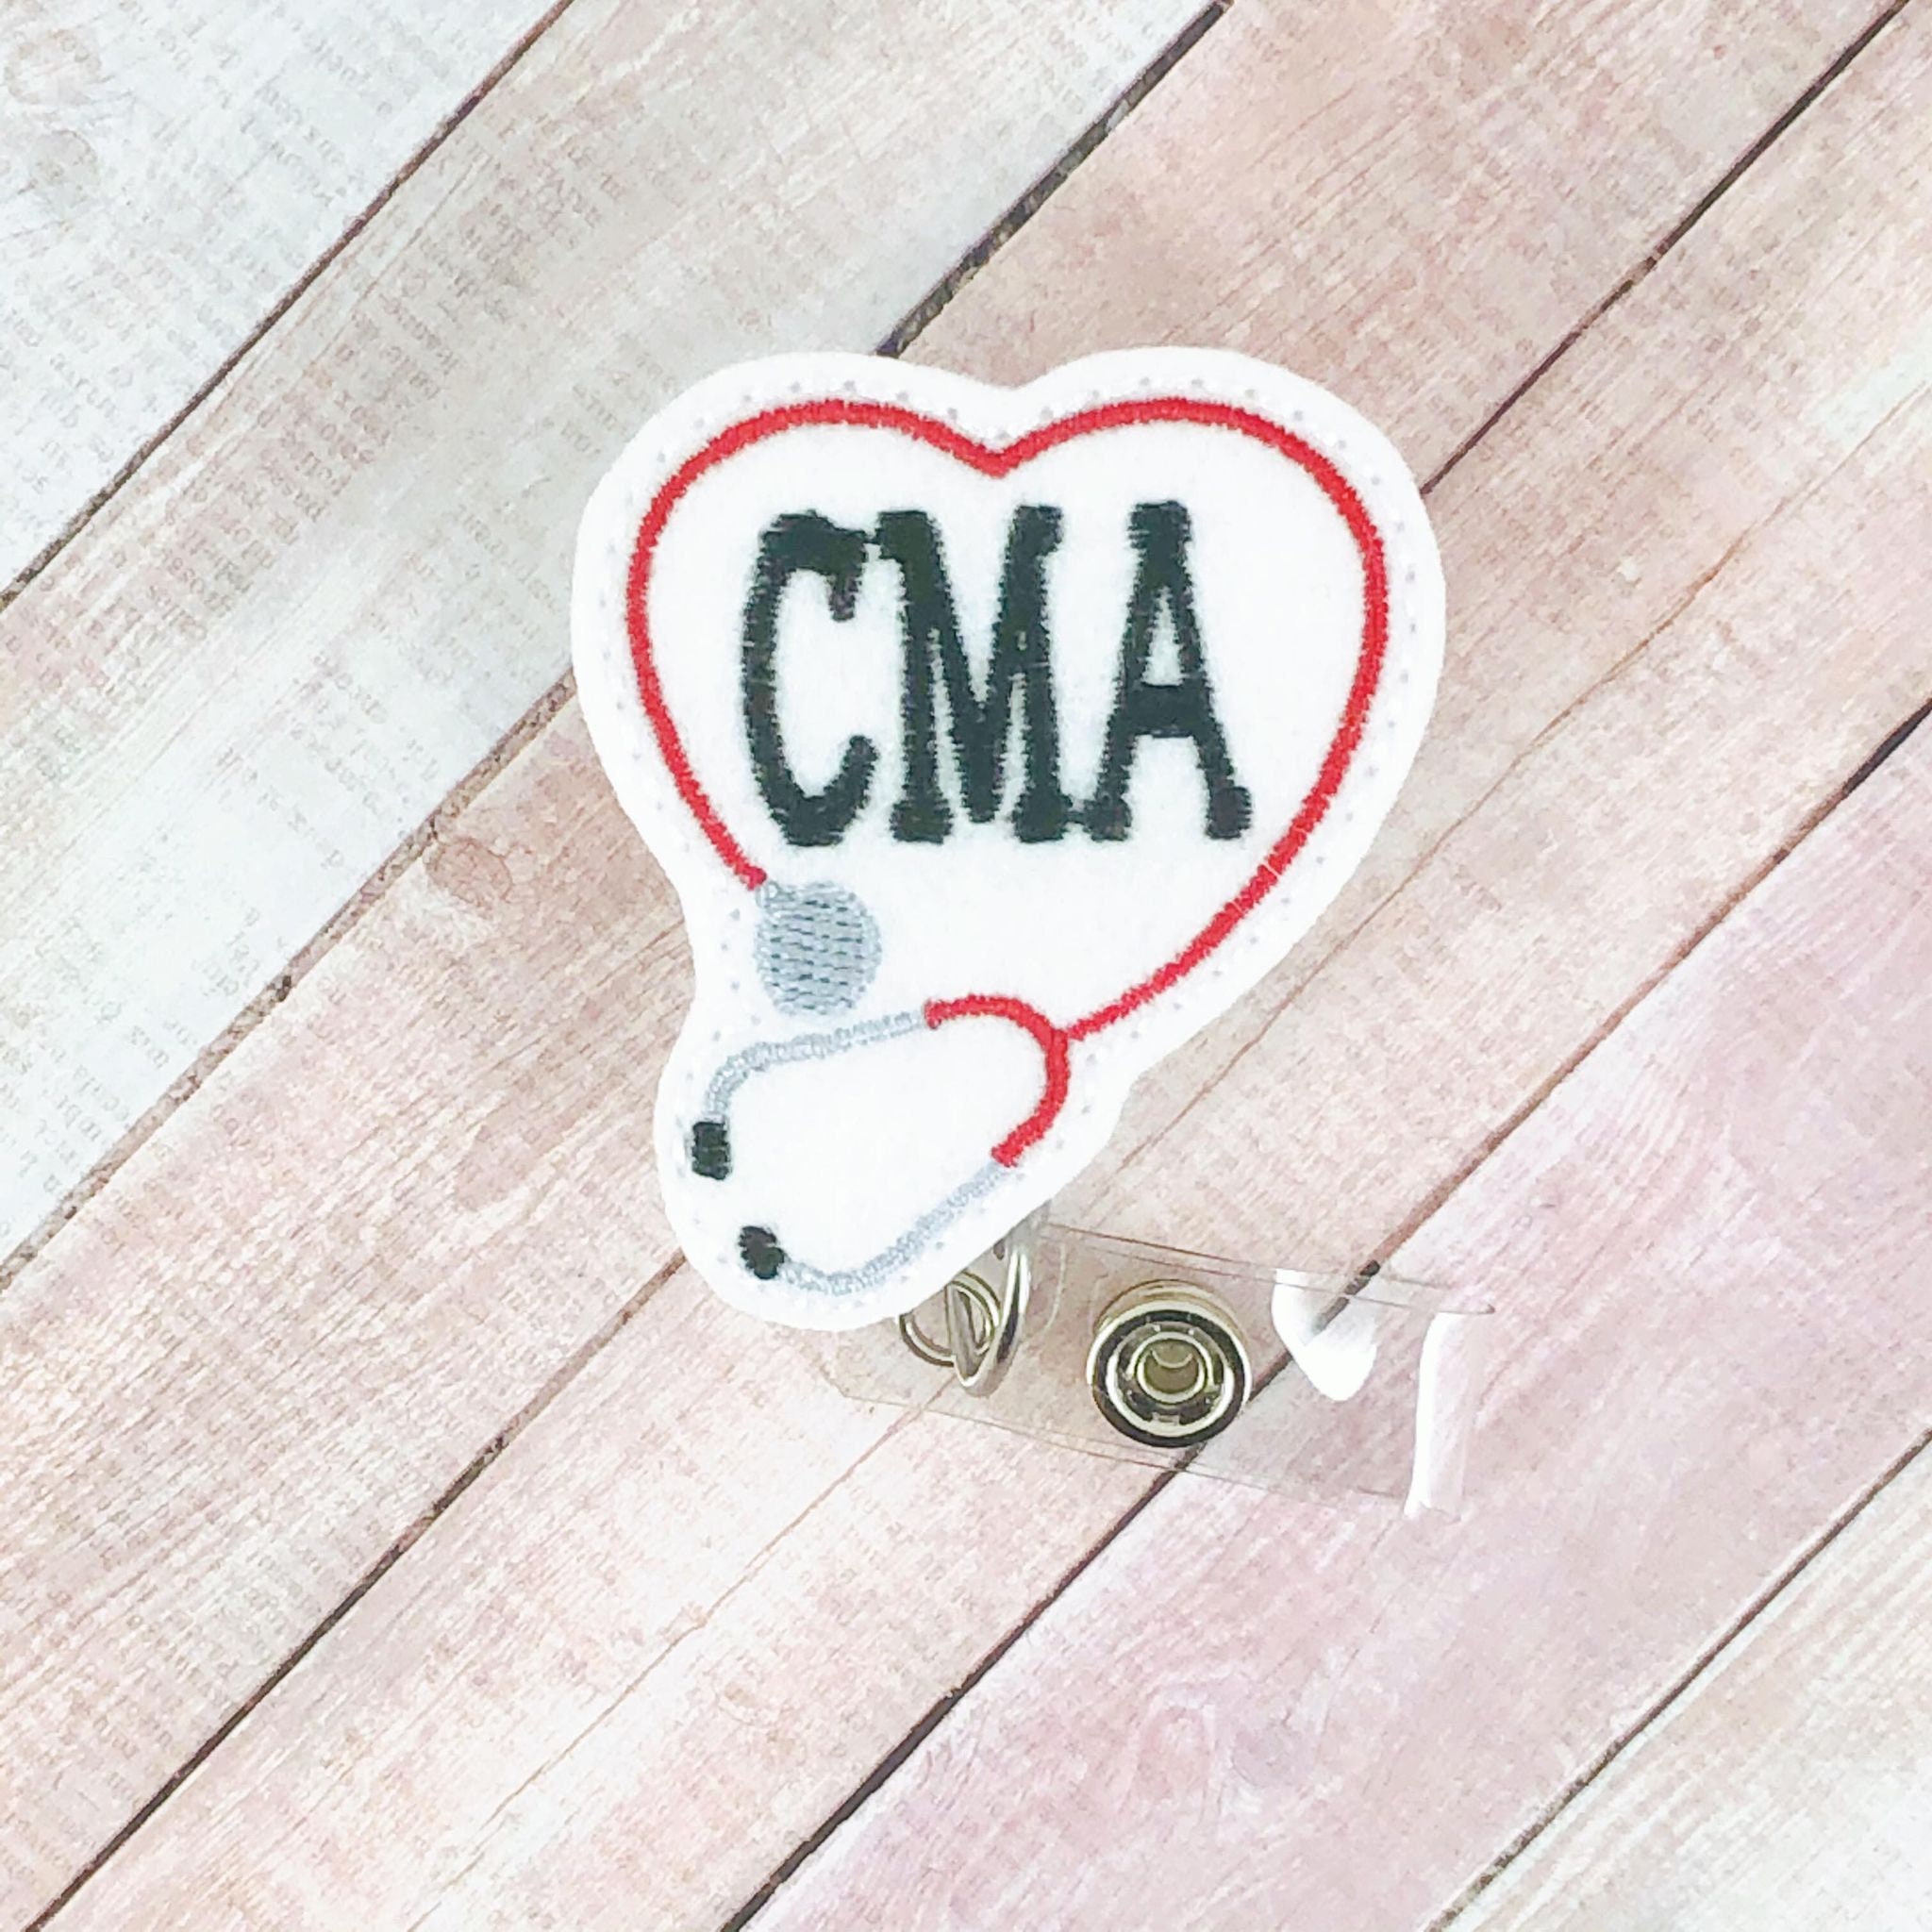 MA CMA Badge Reel for Medical Assistant & Certified Medical Assistant;  Nurse, Nurses, Nursing Assistant ID Lanyard Retractable Holder Medical